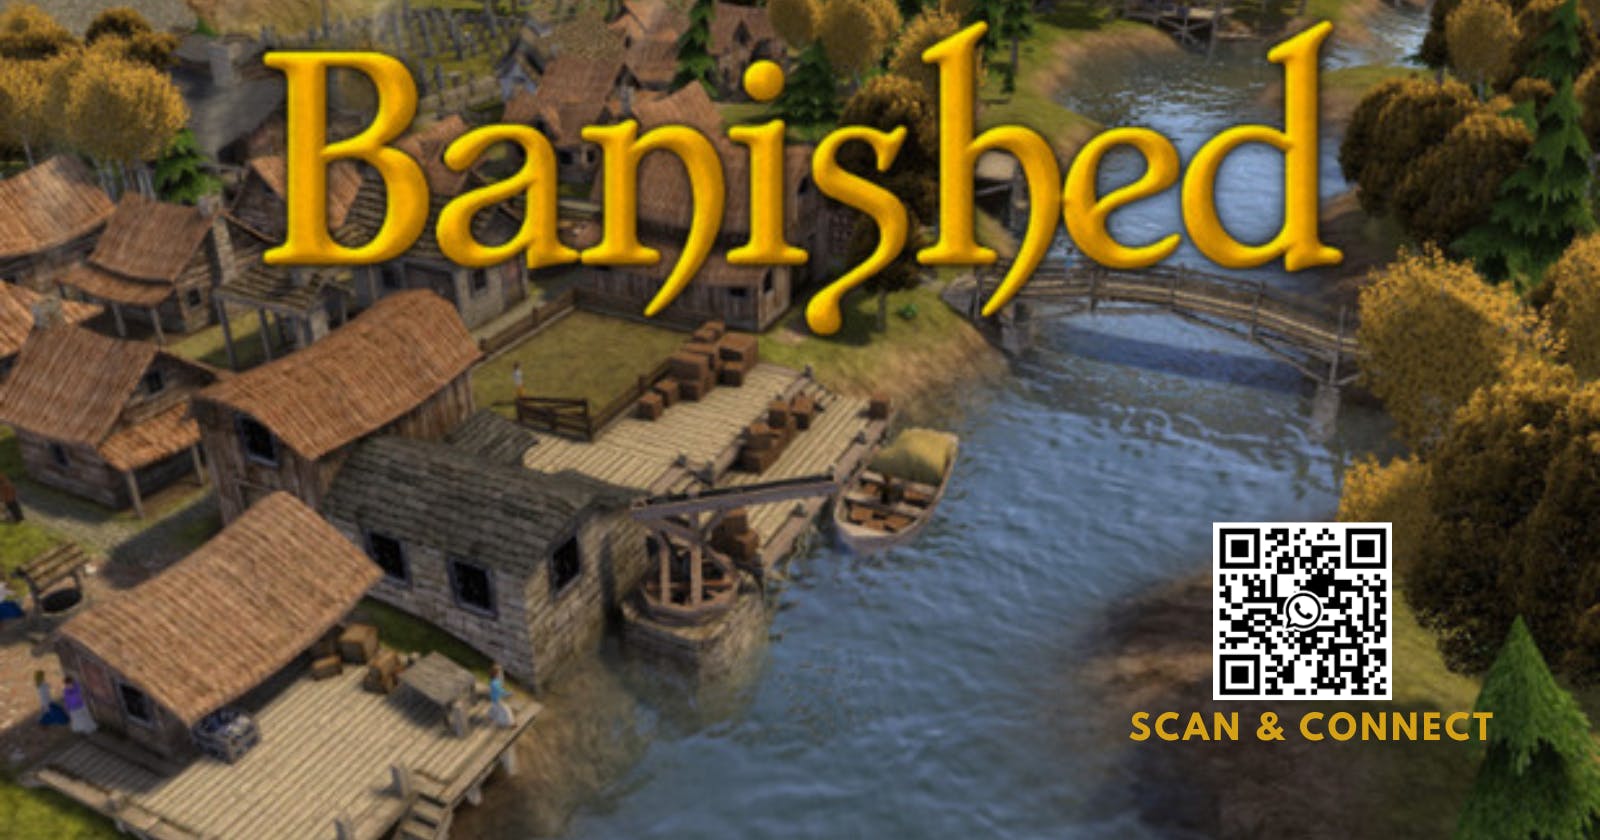 Top 10 Games Like Banished for Android